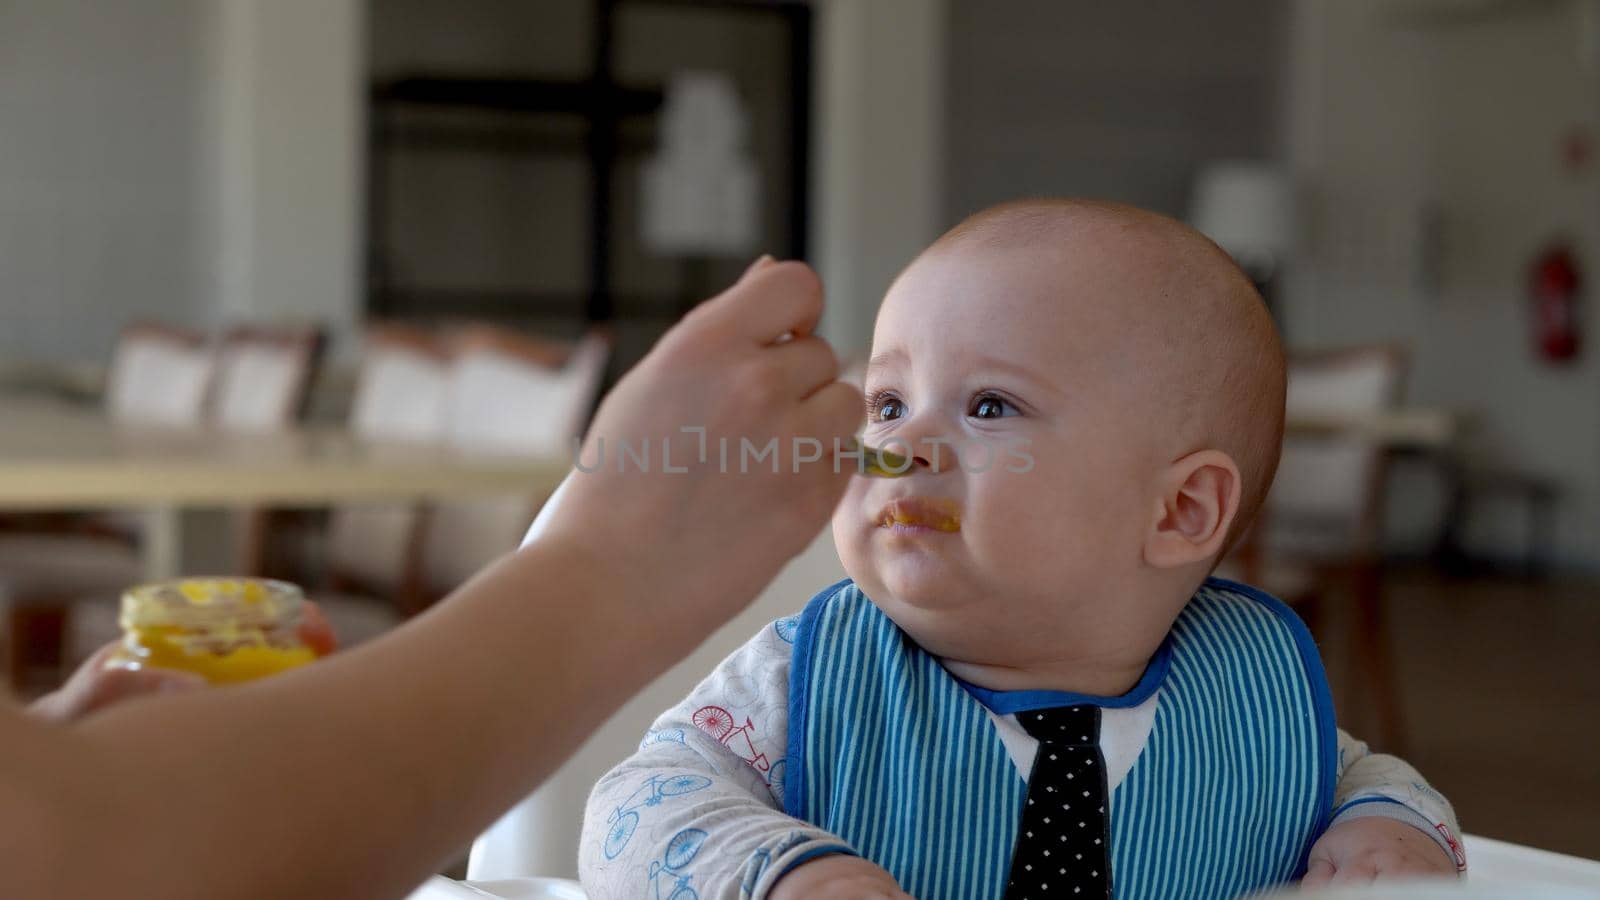 mom Mother feed young baby in white feeding up high chair, first supplement vegetable puree Happy smiling kid eat for the frst time, child with dirty face, little infant boy eating porridge nutrition.